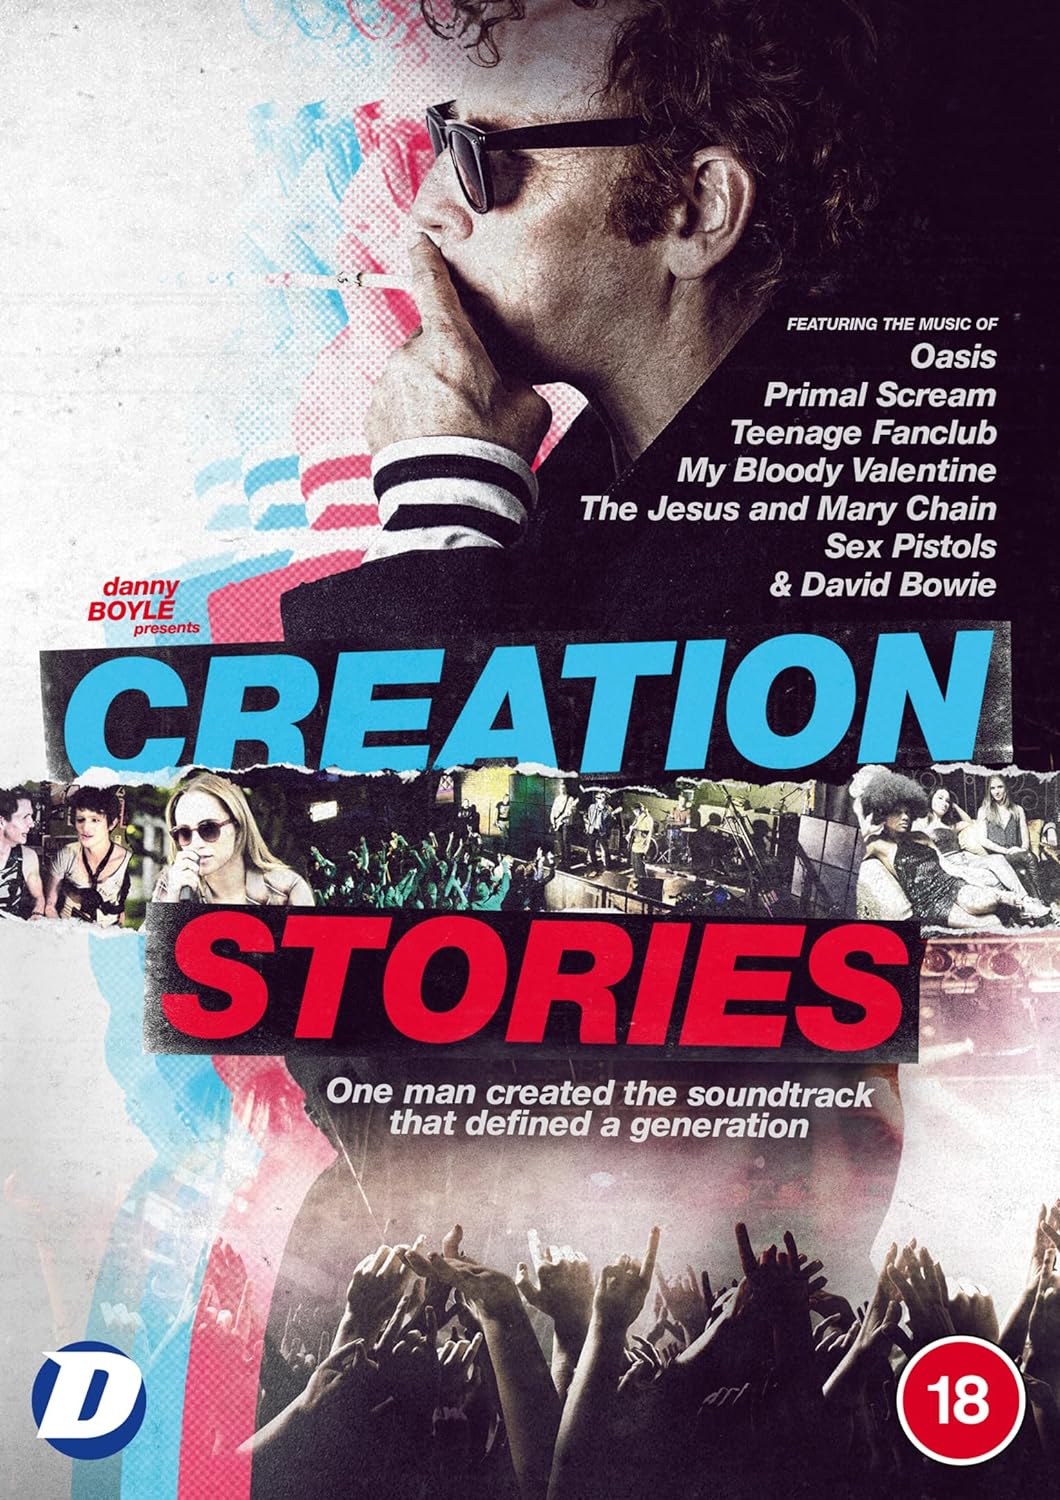 Creation stories DVD front cover